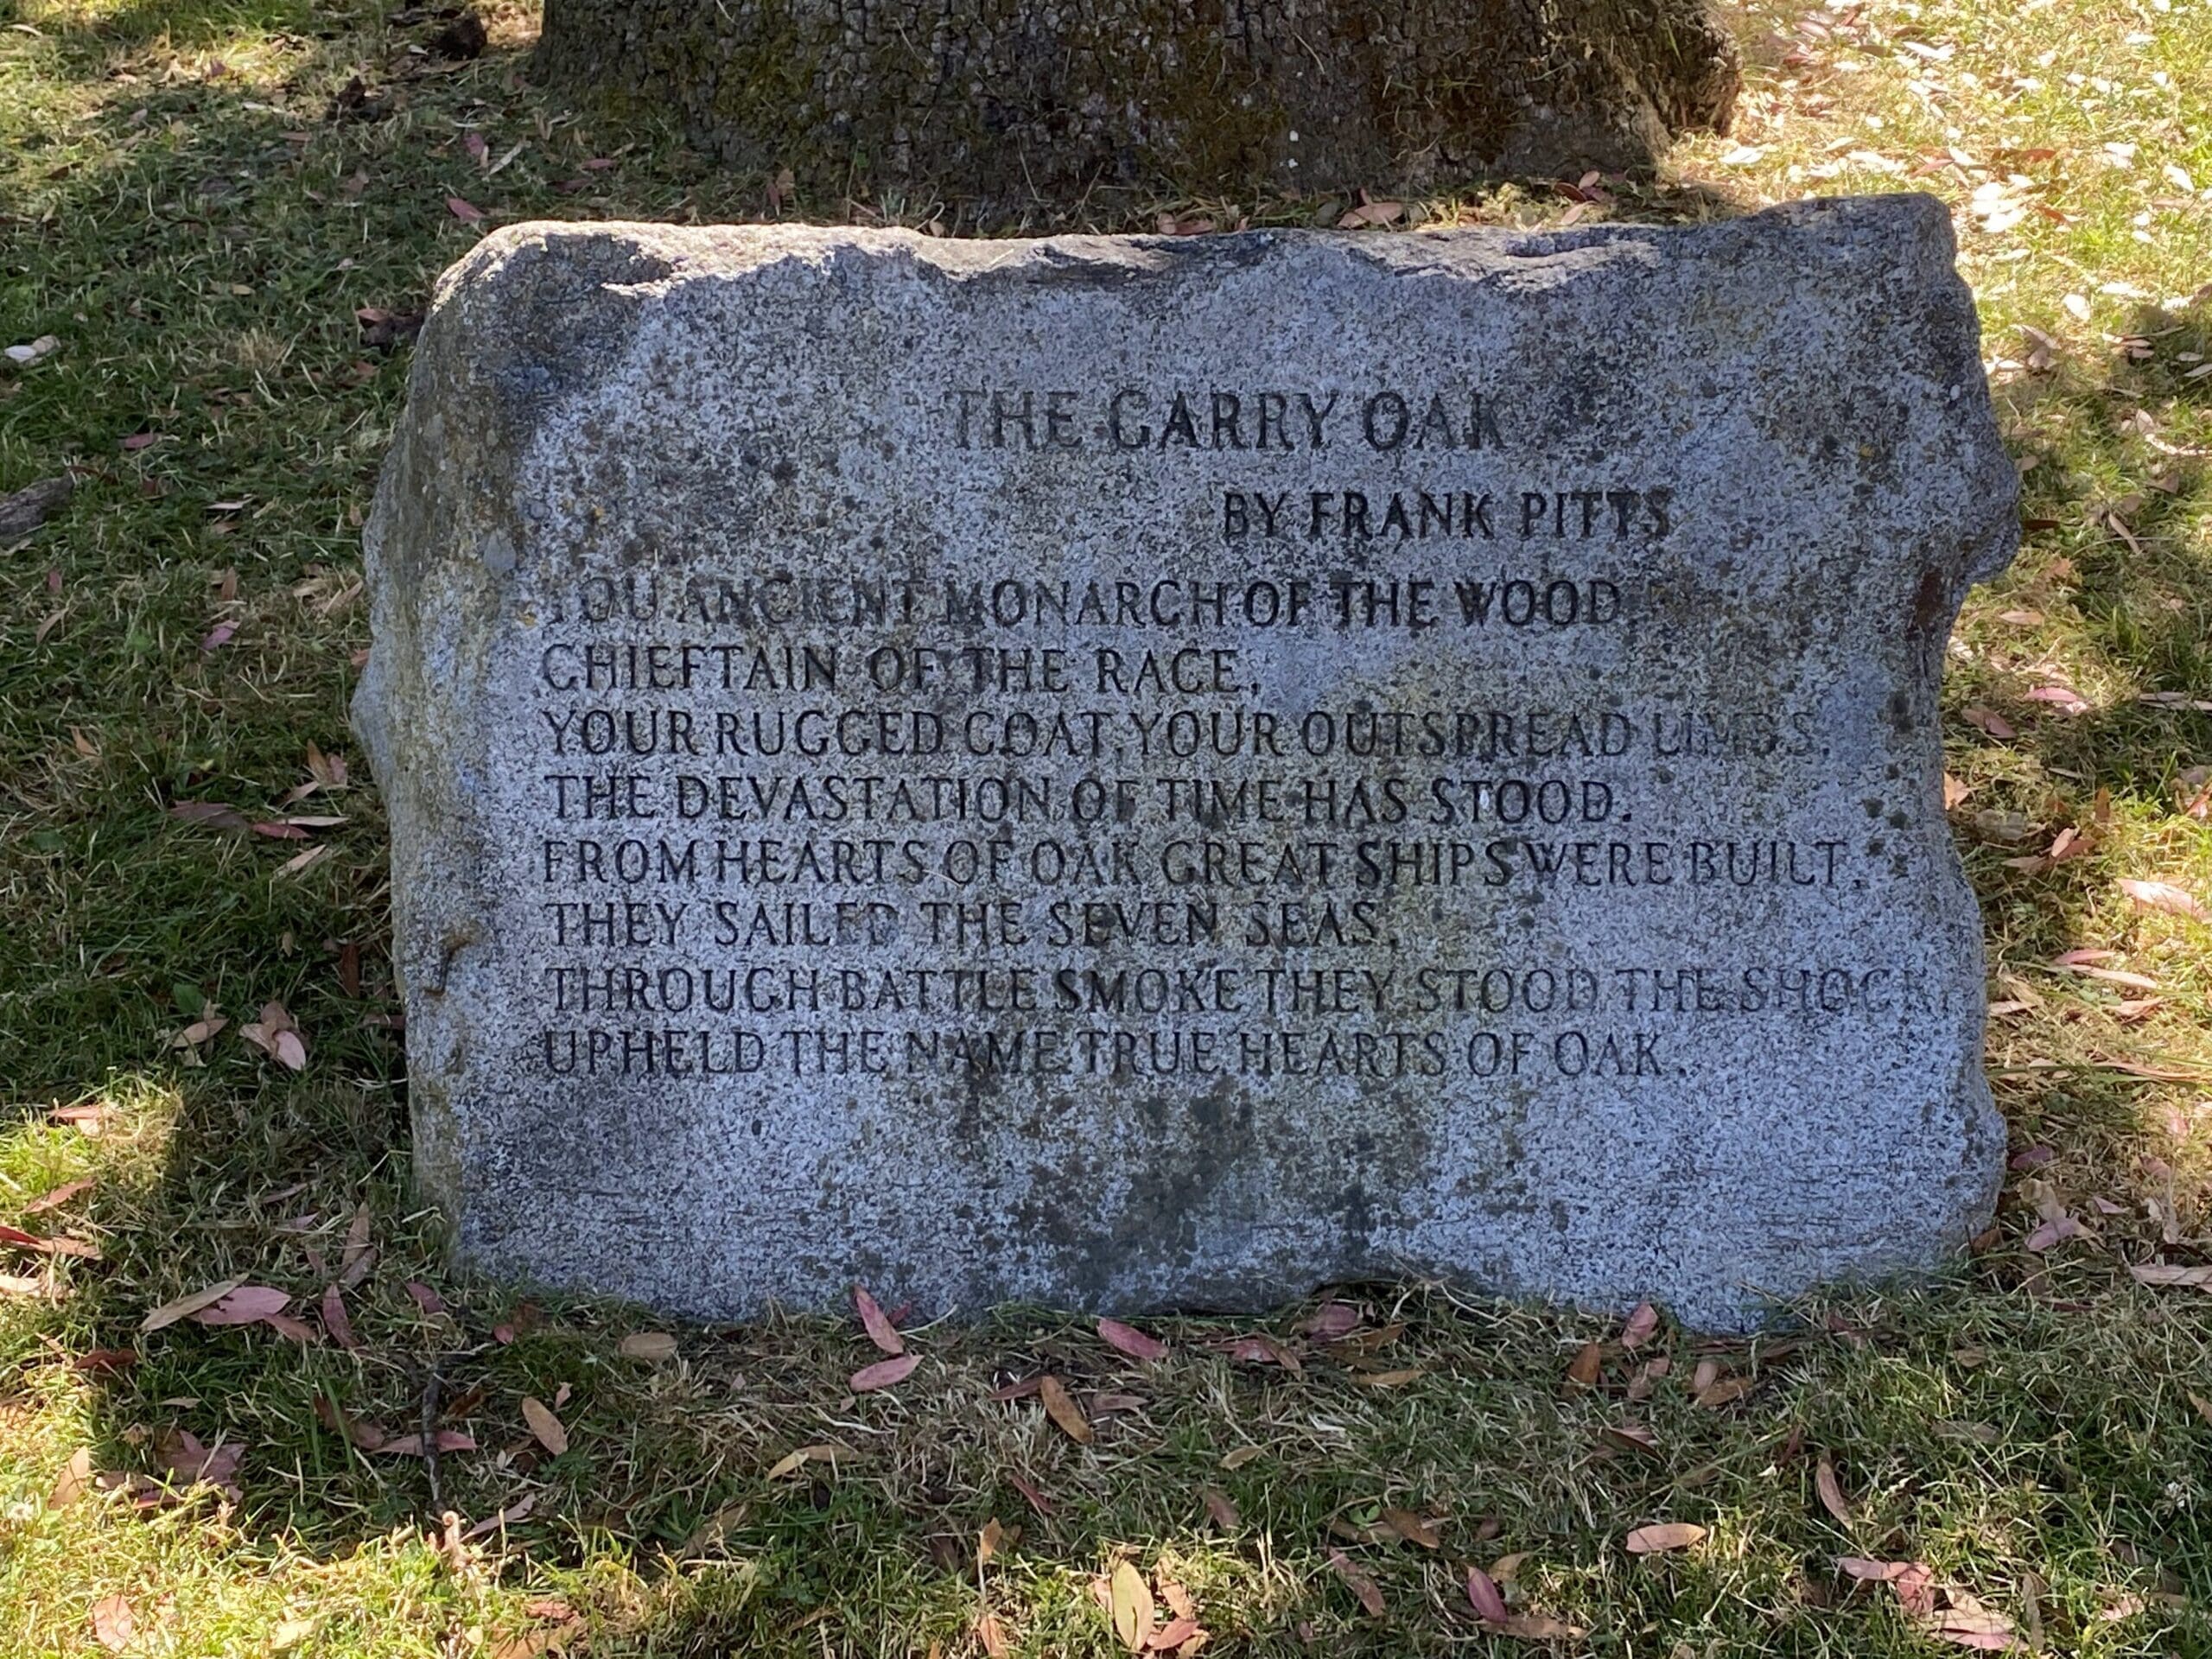 Poem carved into stone by Frank Pitts of the Garry Oak "You Ancient Monarch of the Wood, Chieftain of the Race, Your Rugged Coat, Your outspread Limbs, The devastation of time has stood, from Hearts of Oak great ships were built, they sailed the seven seas. Through battle smoke they stood the shock upheld the name true hearts of Oak.